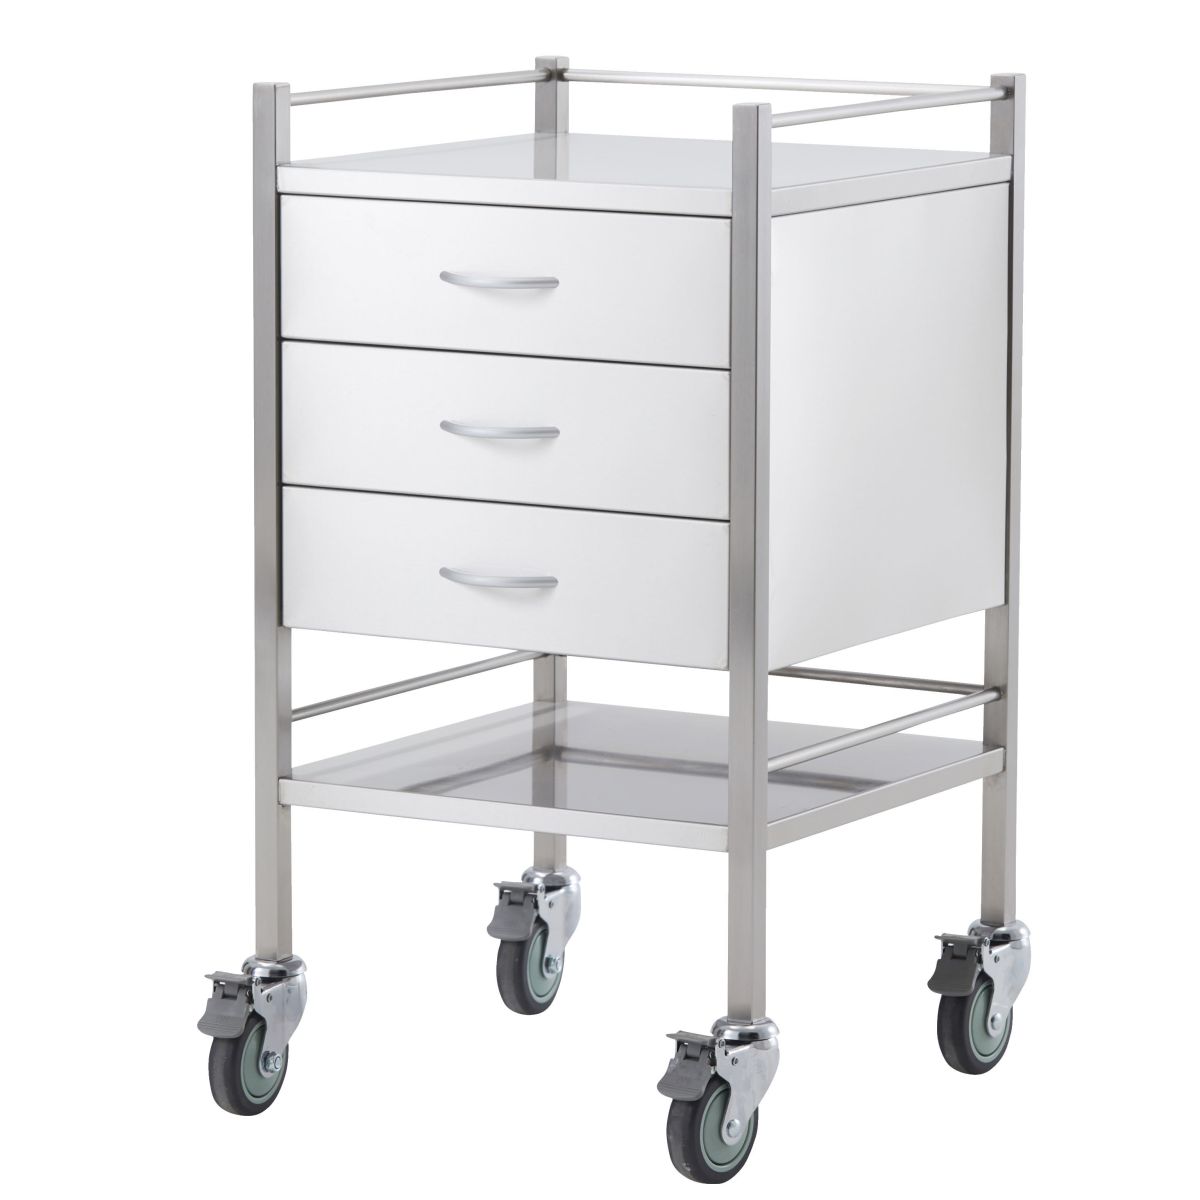 stainless steel medical trolley with 3 drawers and a platform